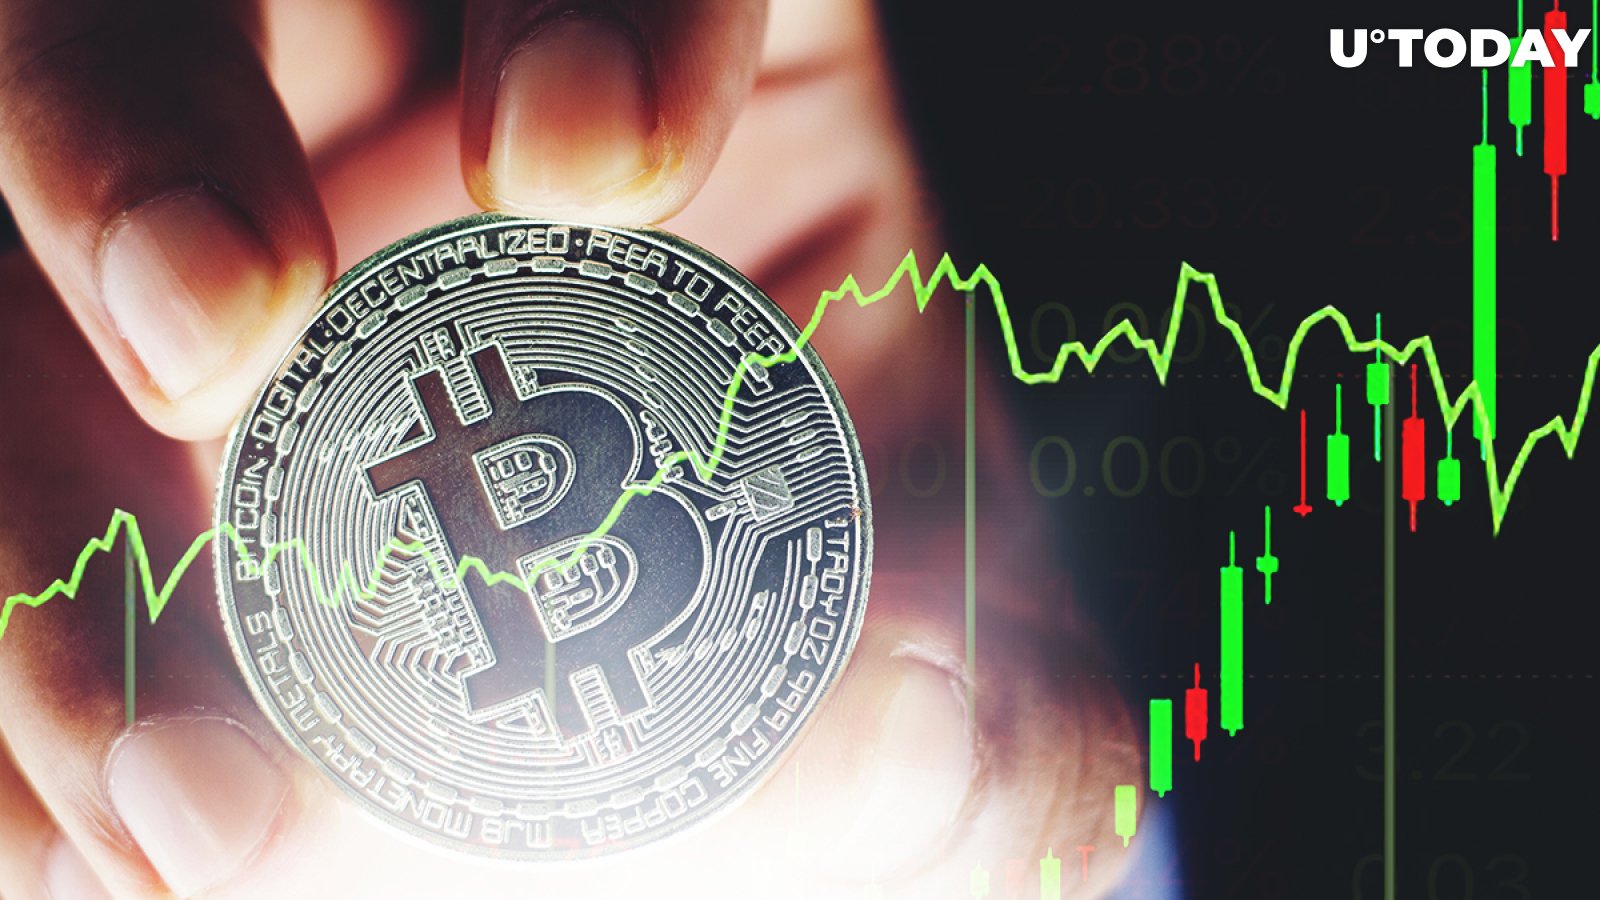 Bitcoin-Stock Correlation High Now, Here's Why It Is Not Good For Bitcoin: Santiment Data